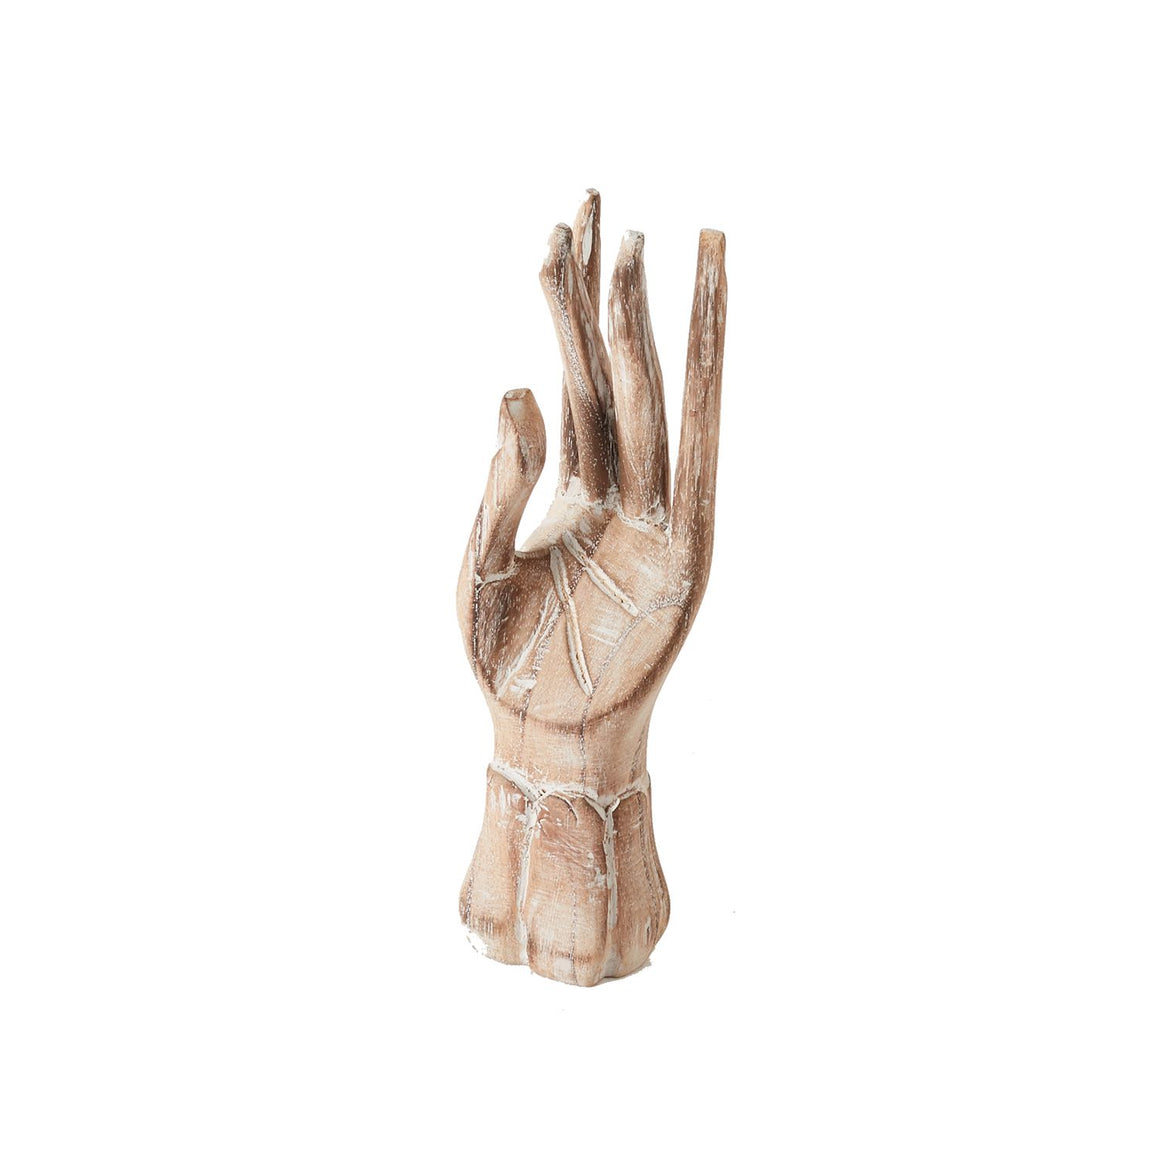 Offering Collection - Hand Statue